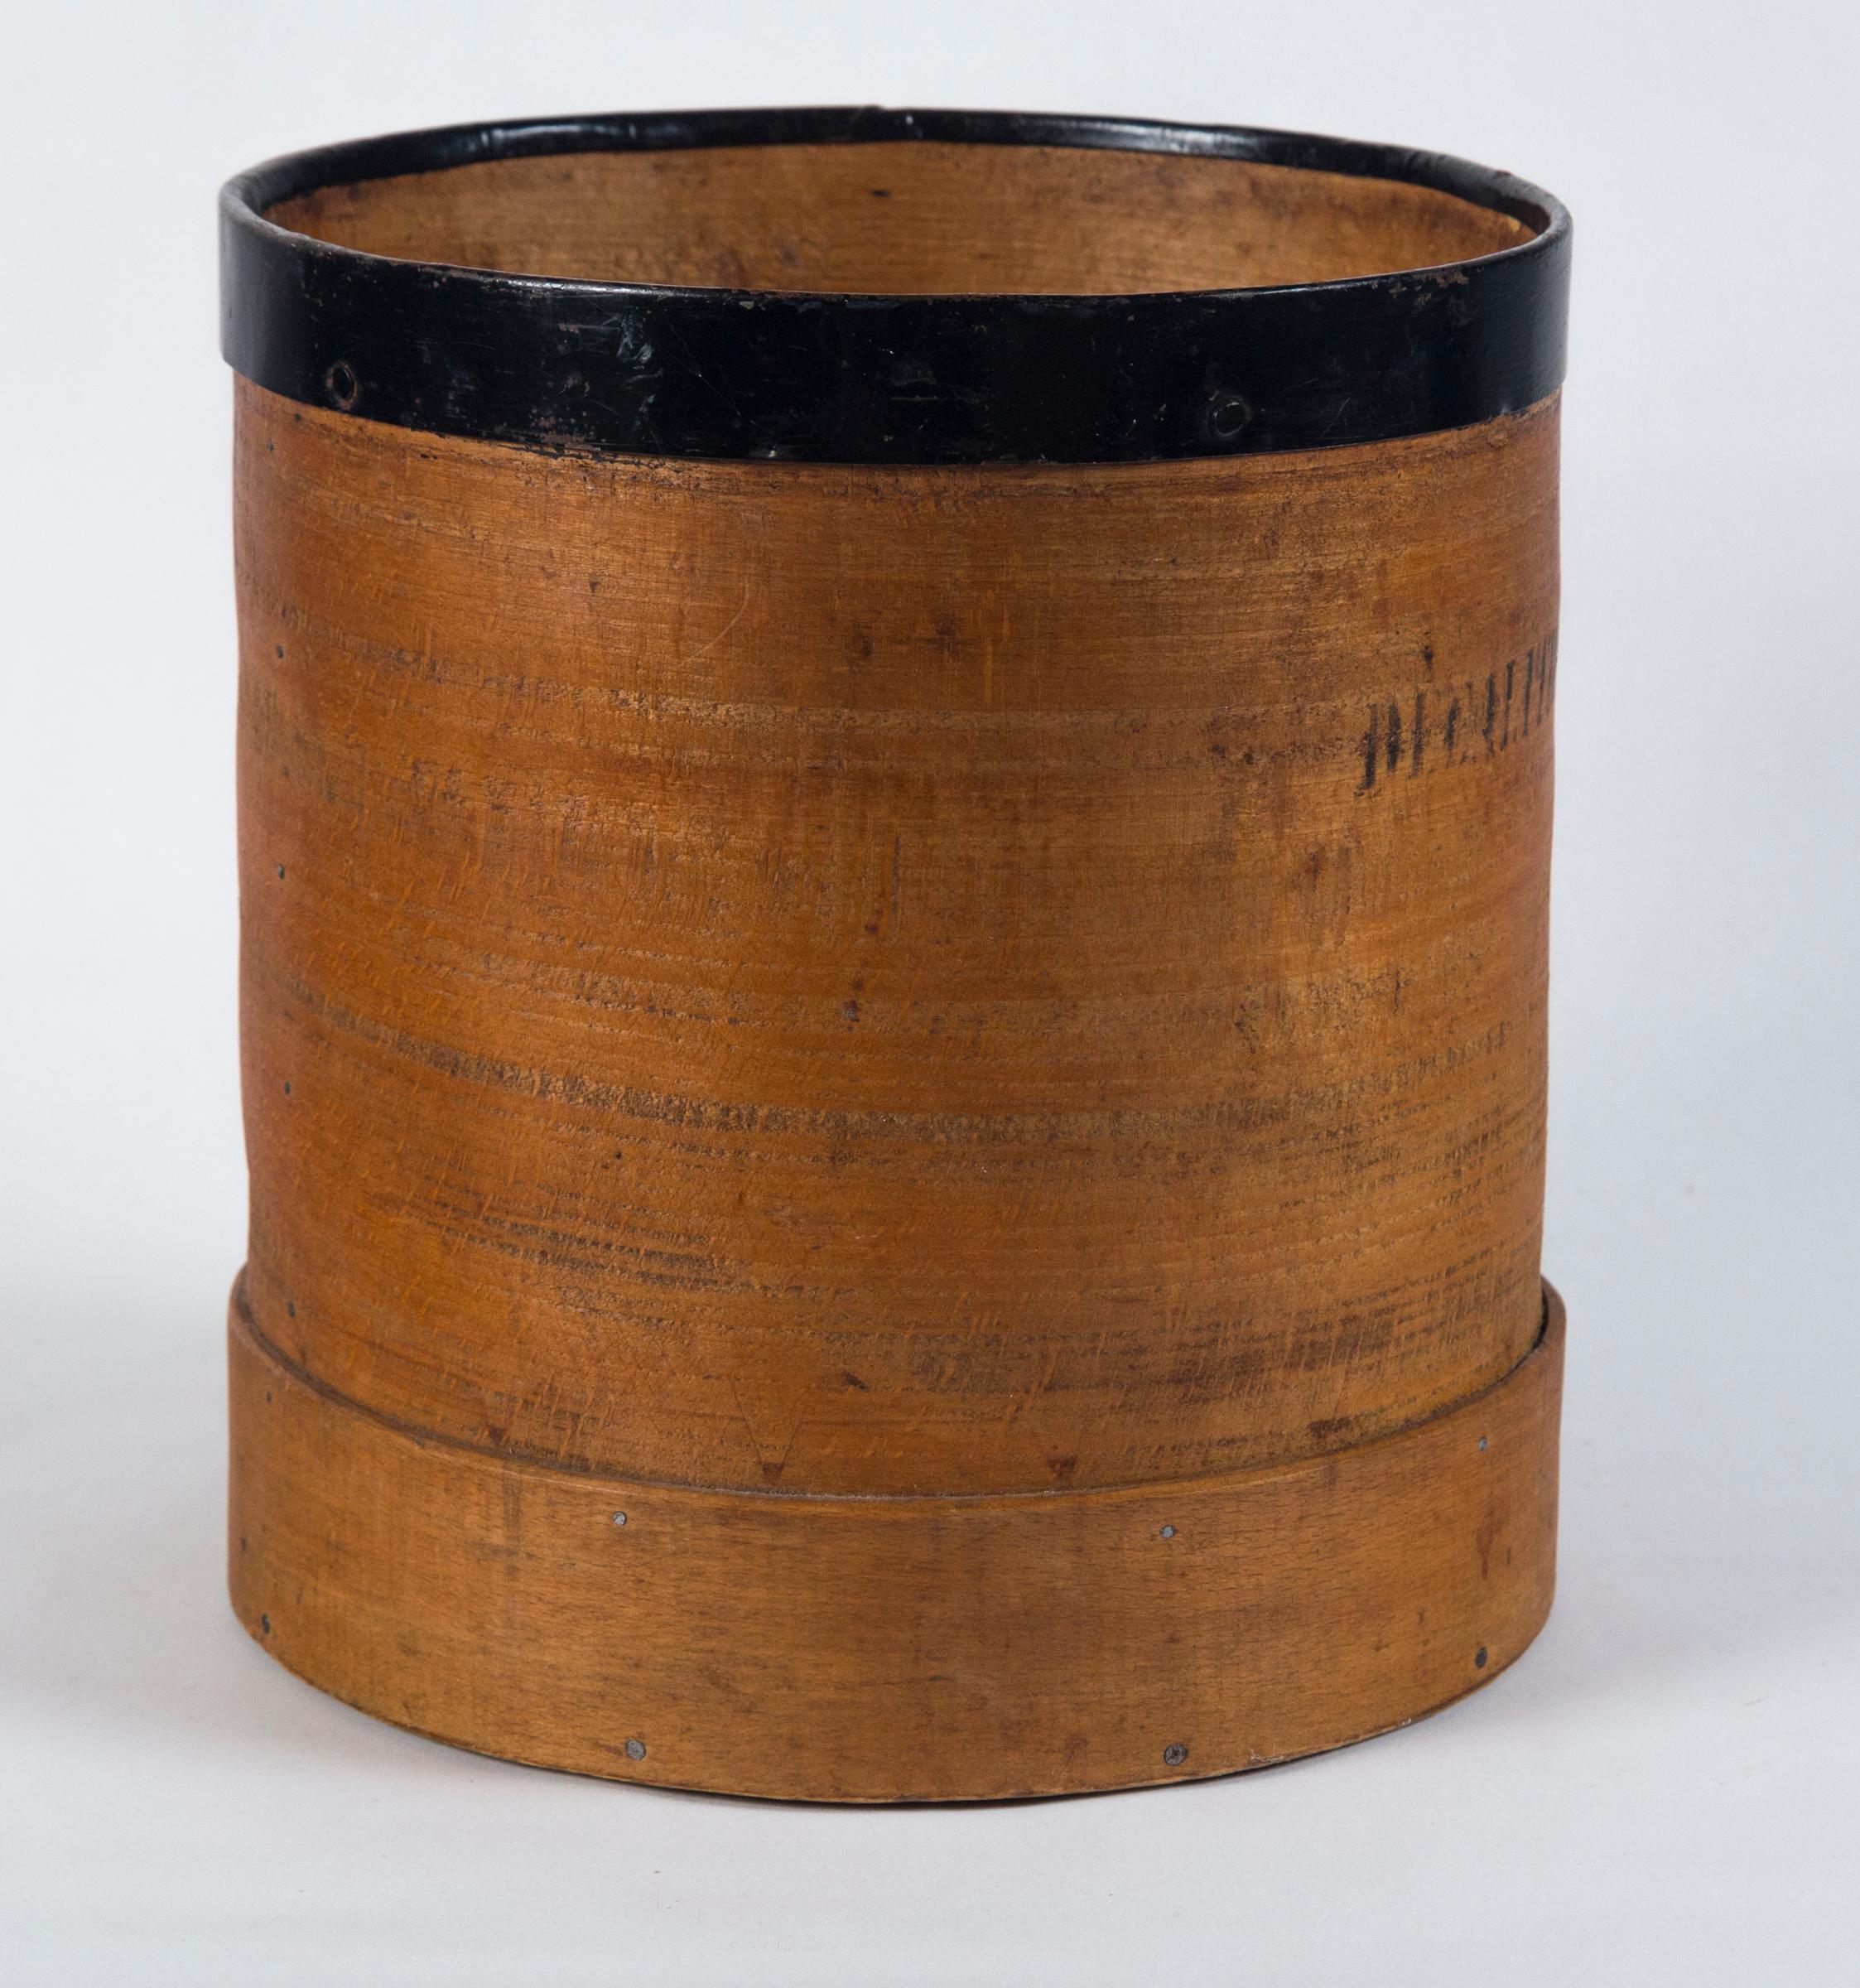 Wood Antique French Grain Measure, Early 20th Century